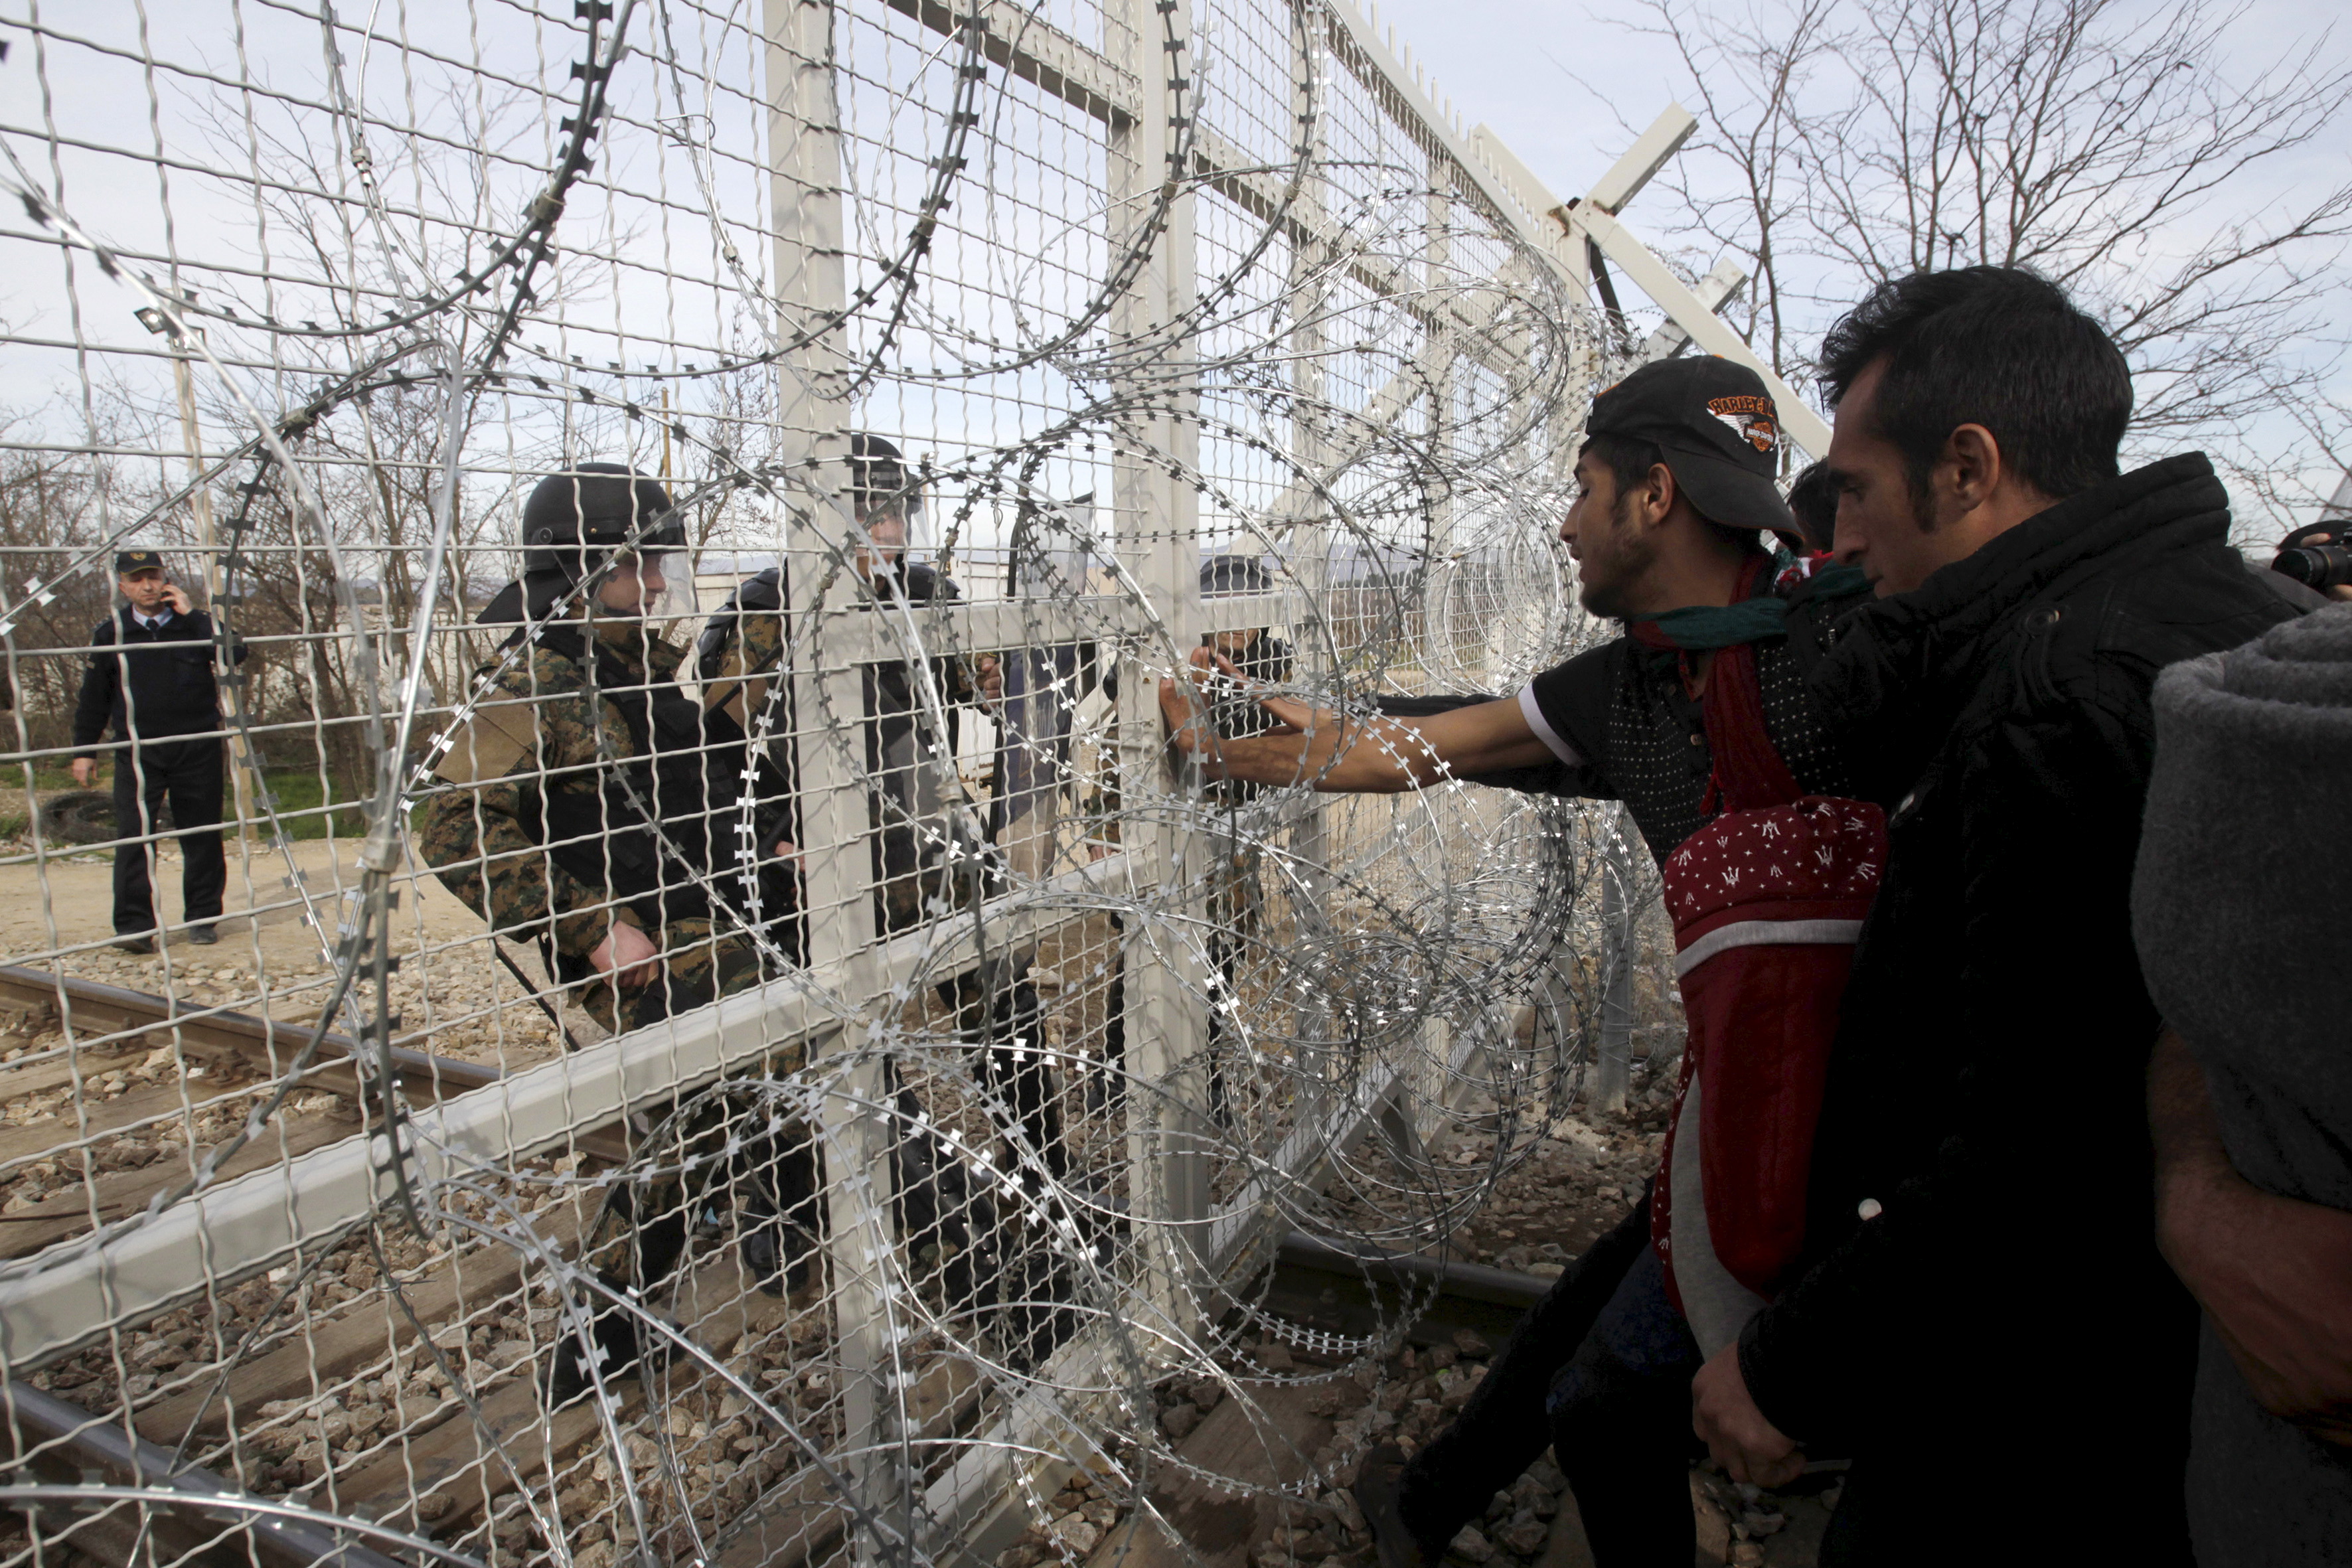 Refugees and migrants stand next to a border fence at the Greek-Macedonian border, near the village of Idomeni, Greece, on Feb. 22, 2016 (Alexandros Avramidis—Reuters)